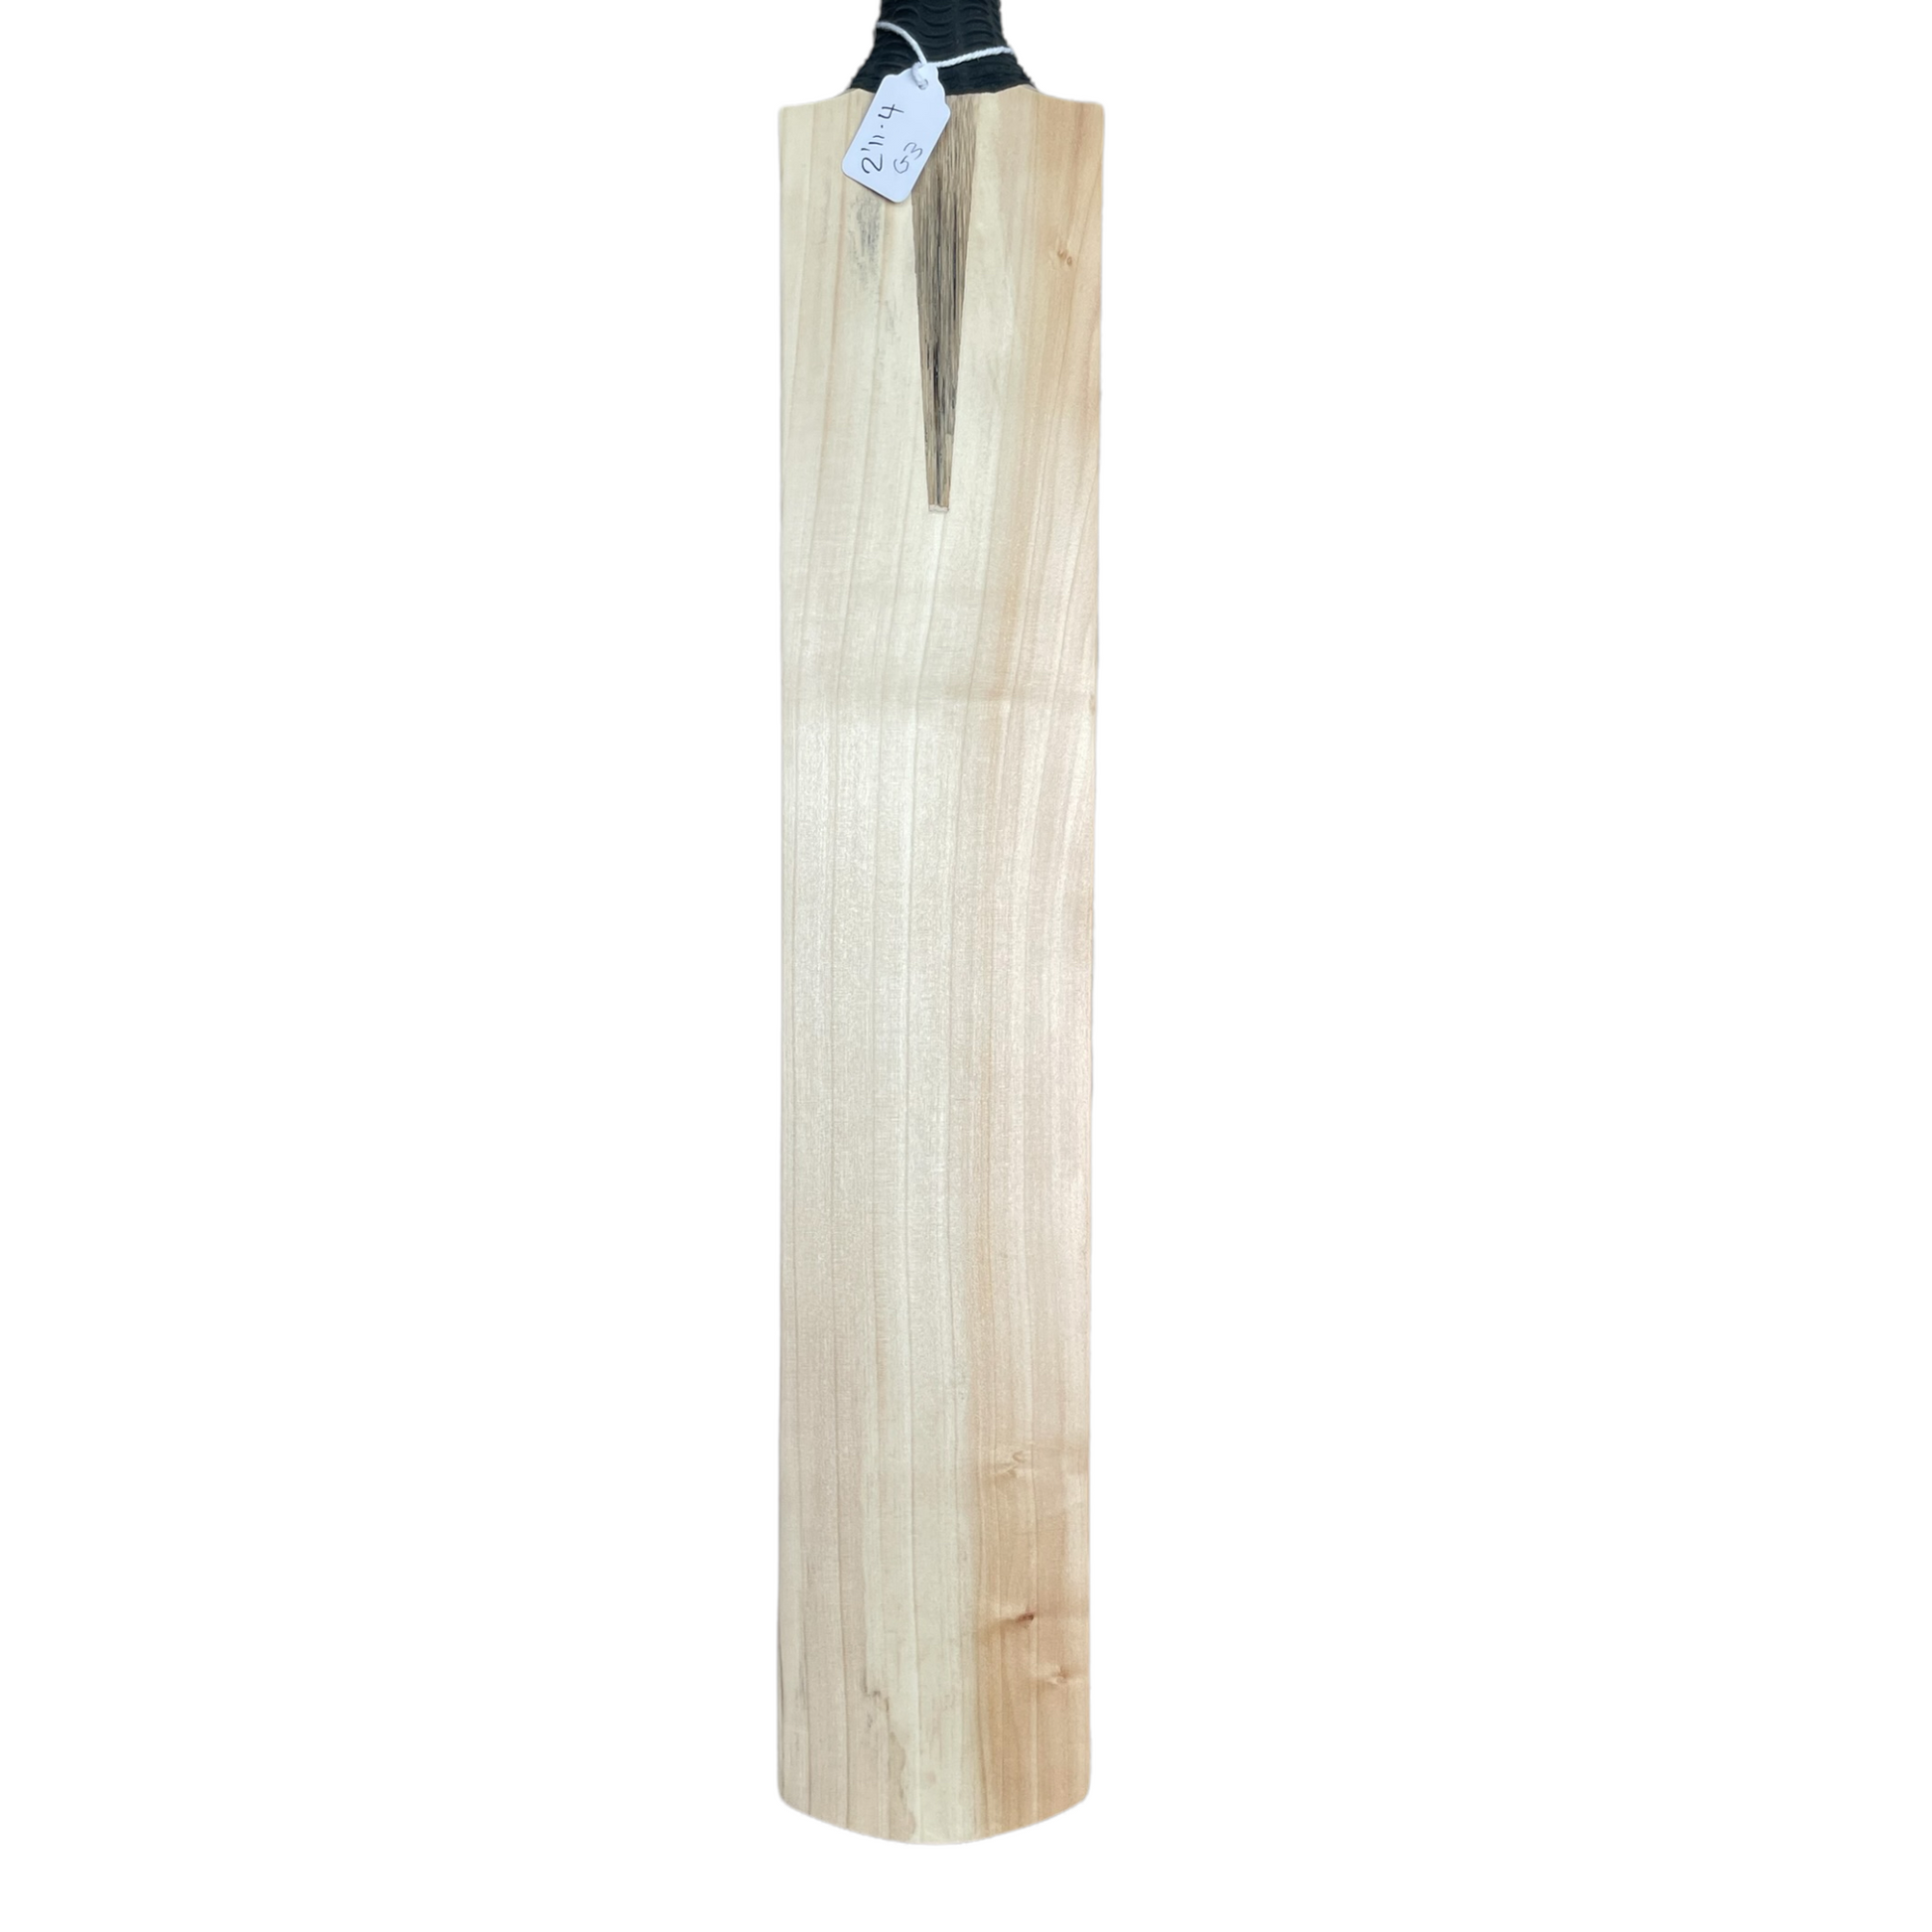 Plain Handmade English Willow Cricket Bats No stickers Discounted price Bargain Price Great deal Best price Lowest price Brighton and Hove Sussex Surrey hampshire Kent London Grade 3